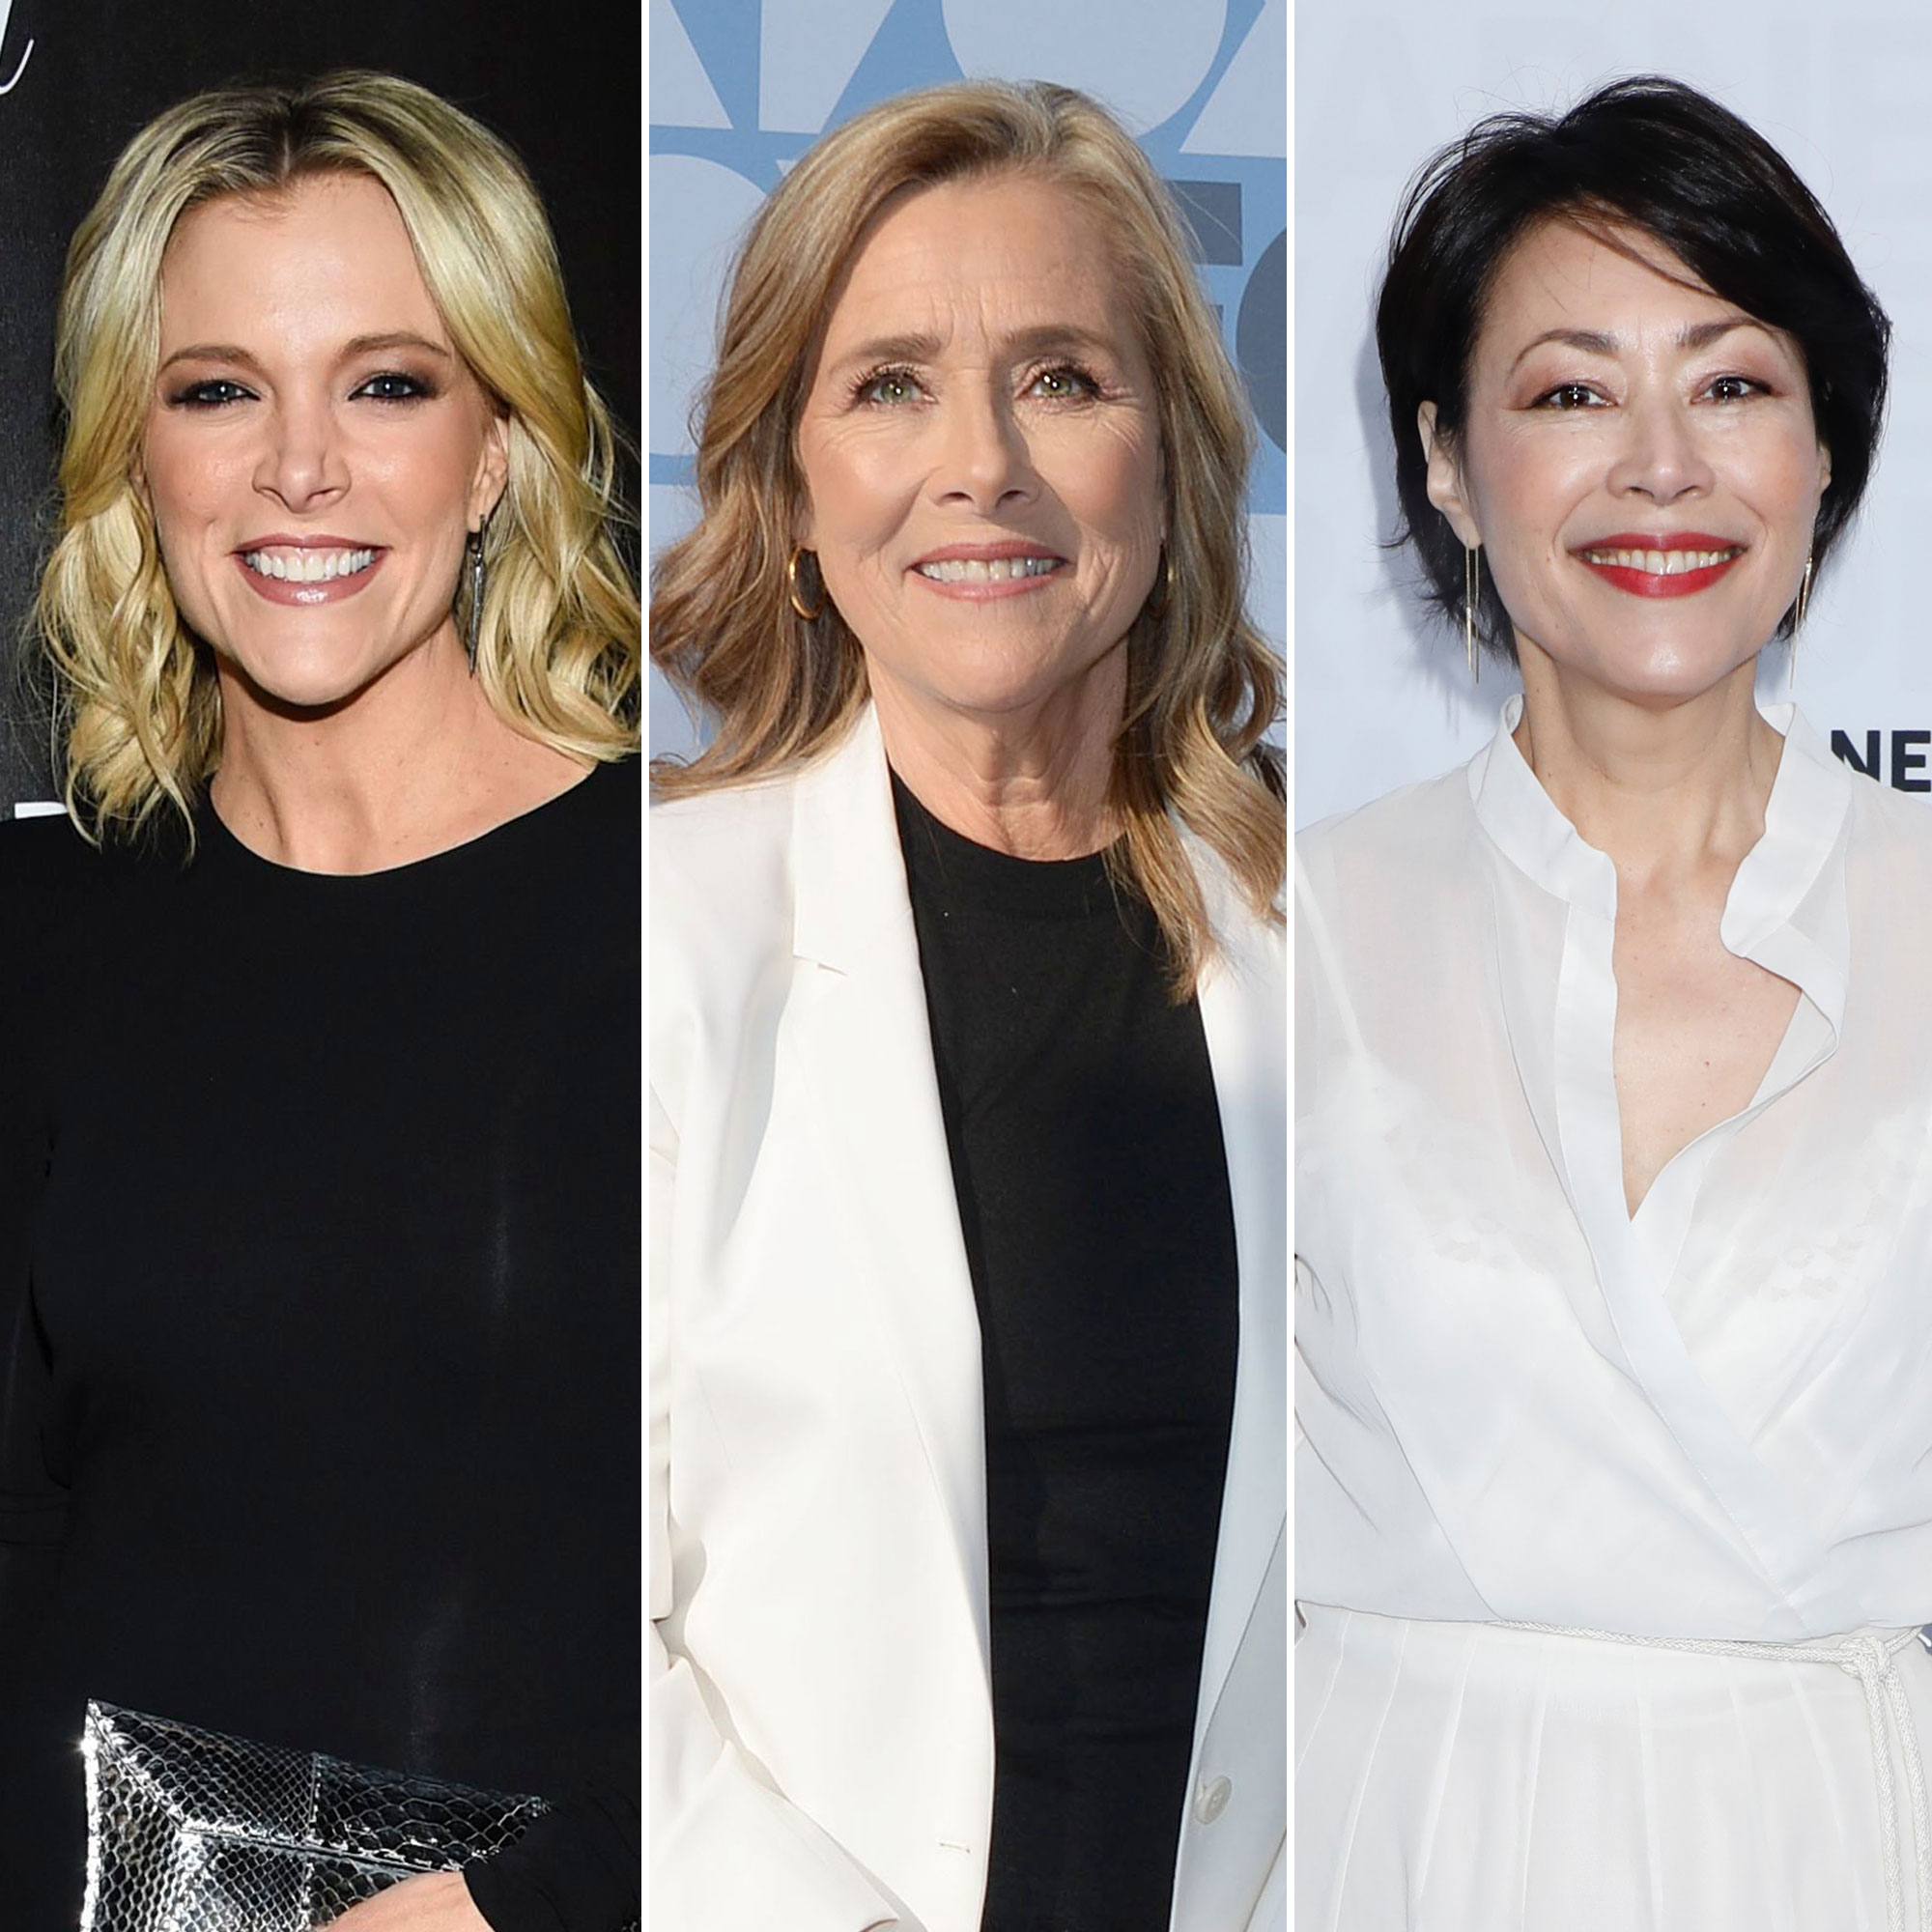 Ann Curry Porn Real - Megyn Kelly Applauds Former 'Today' Hosts for Supporting Women